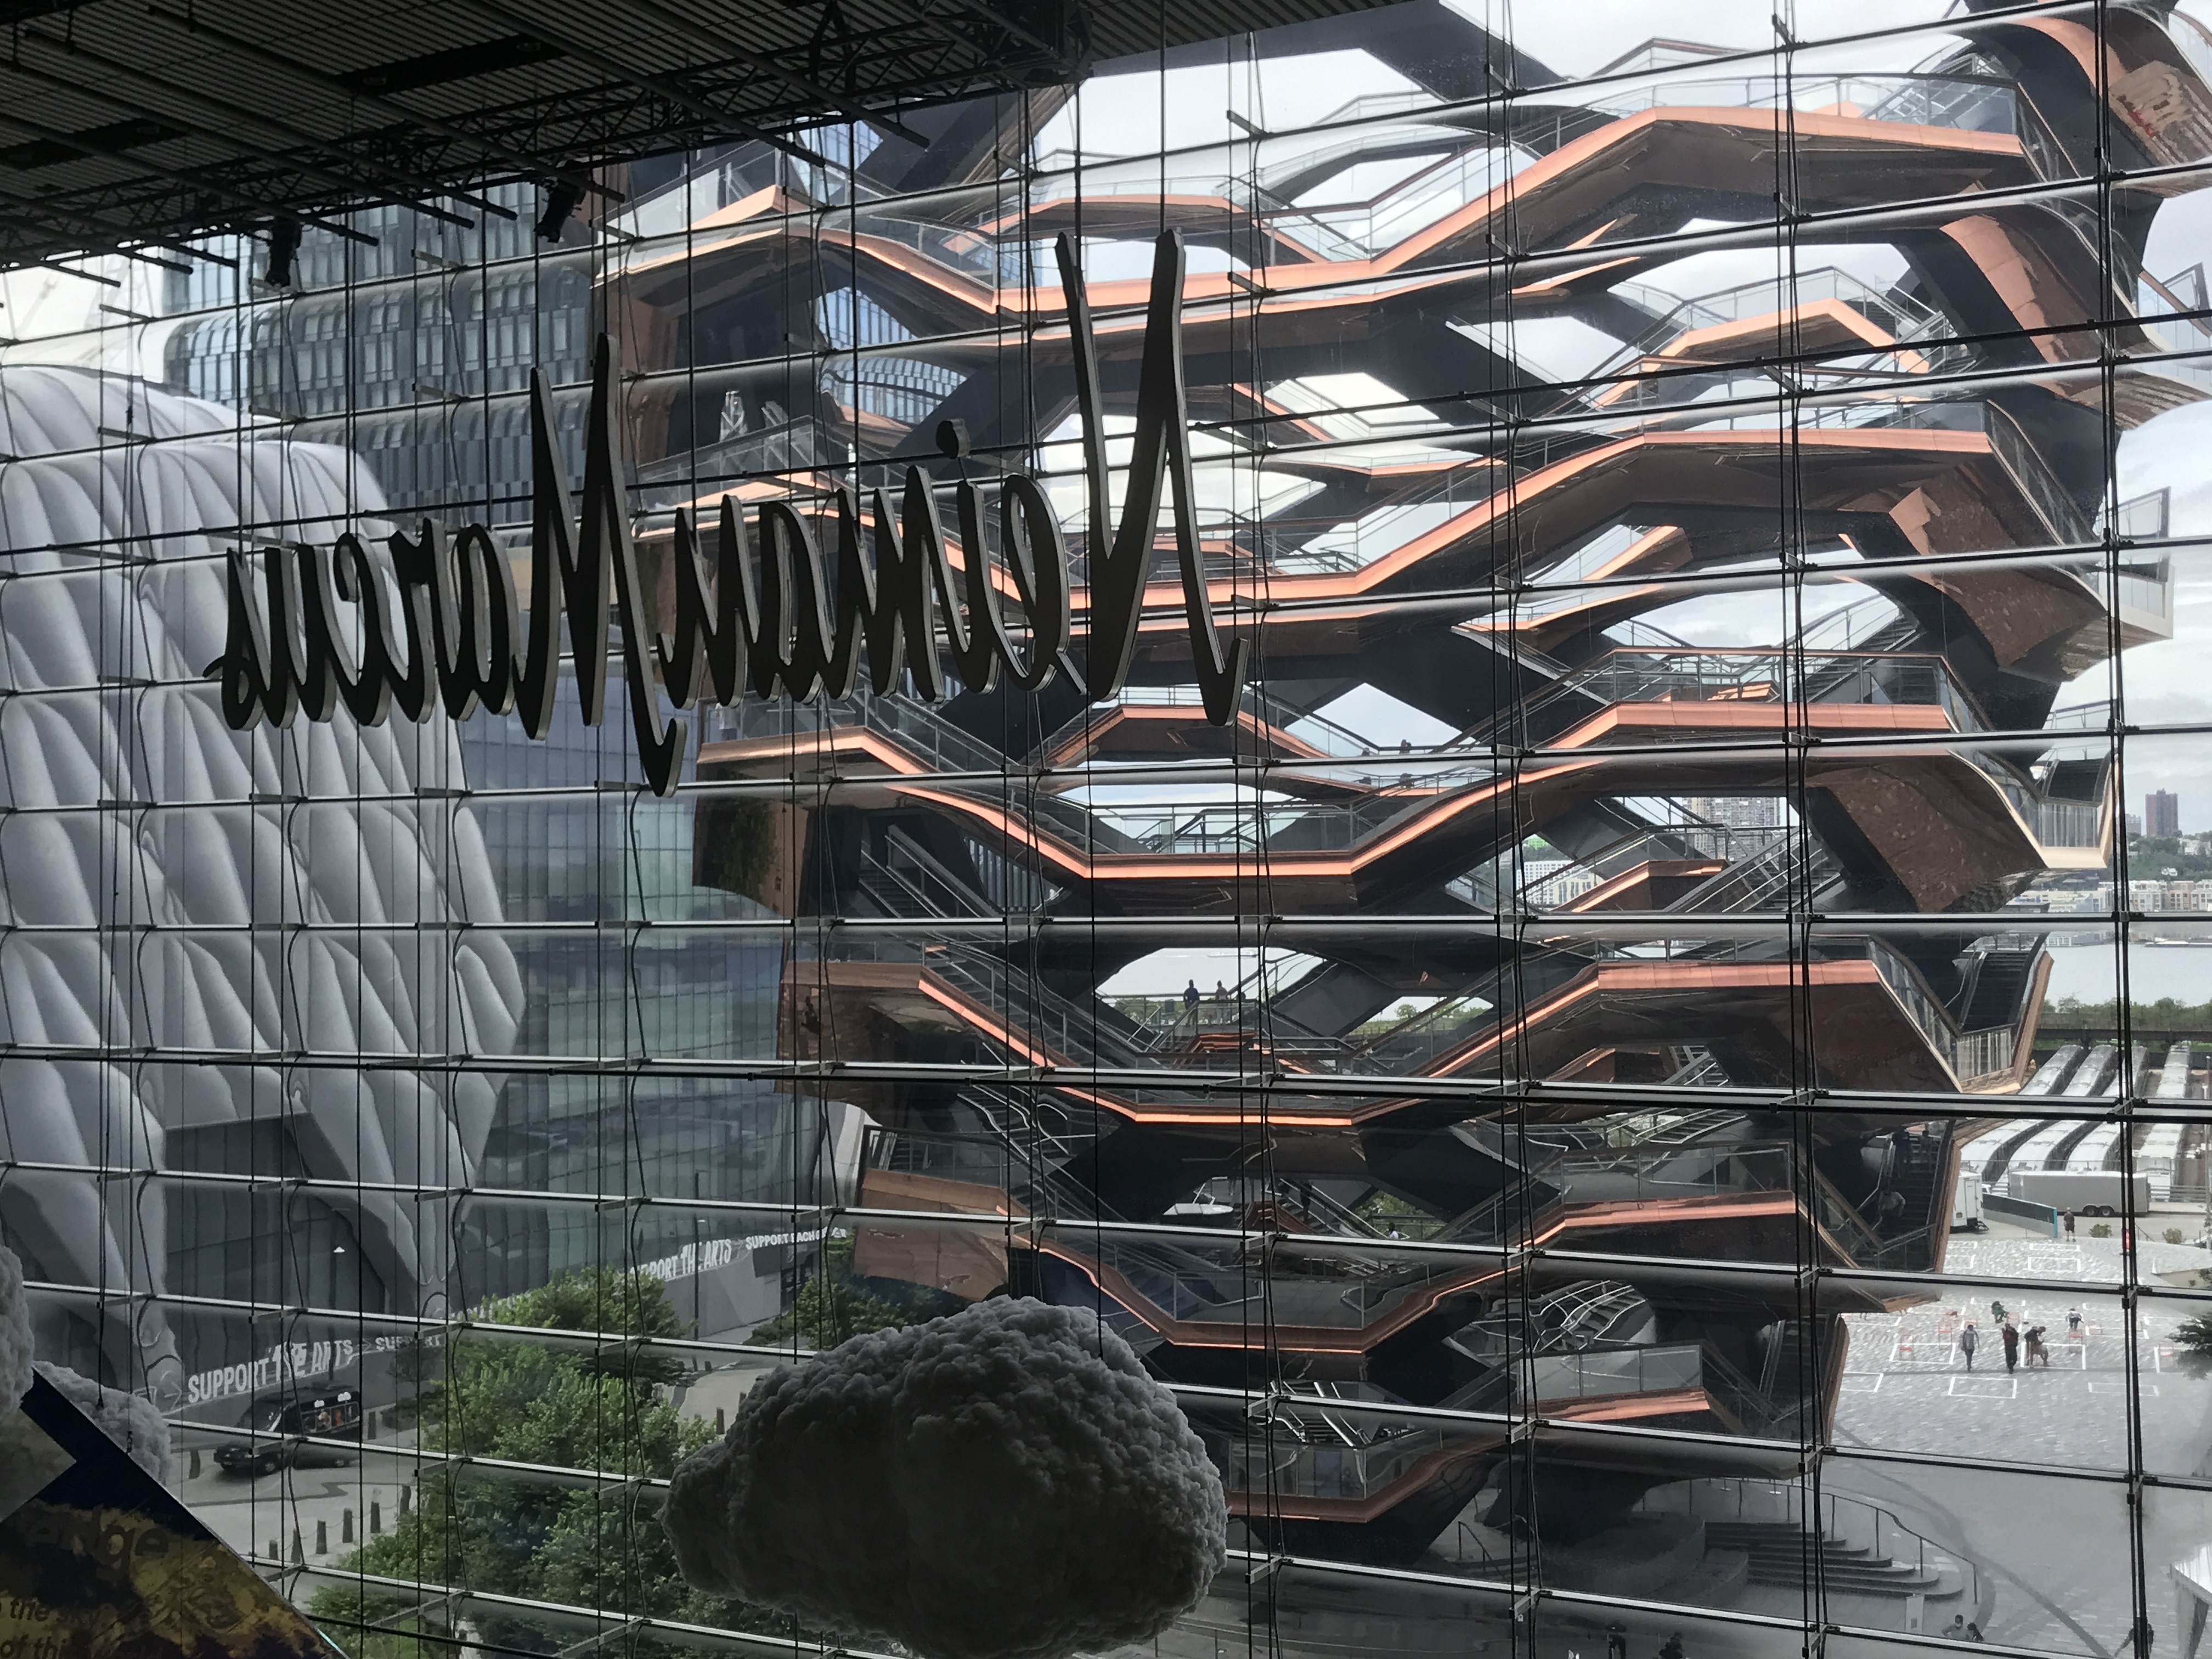 Neiman Marcus store at Hudson Yards is being shopped as office space